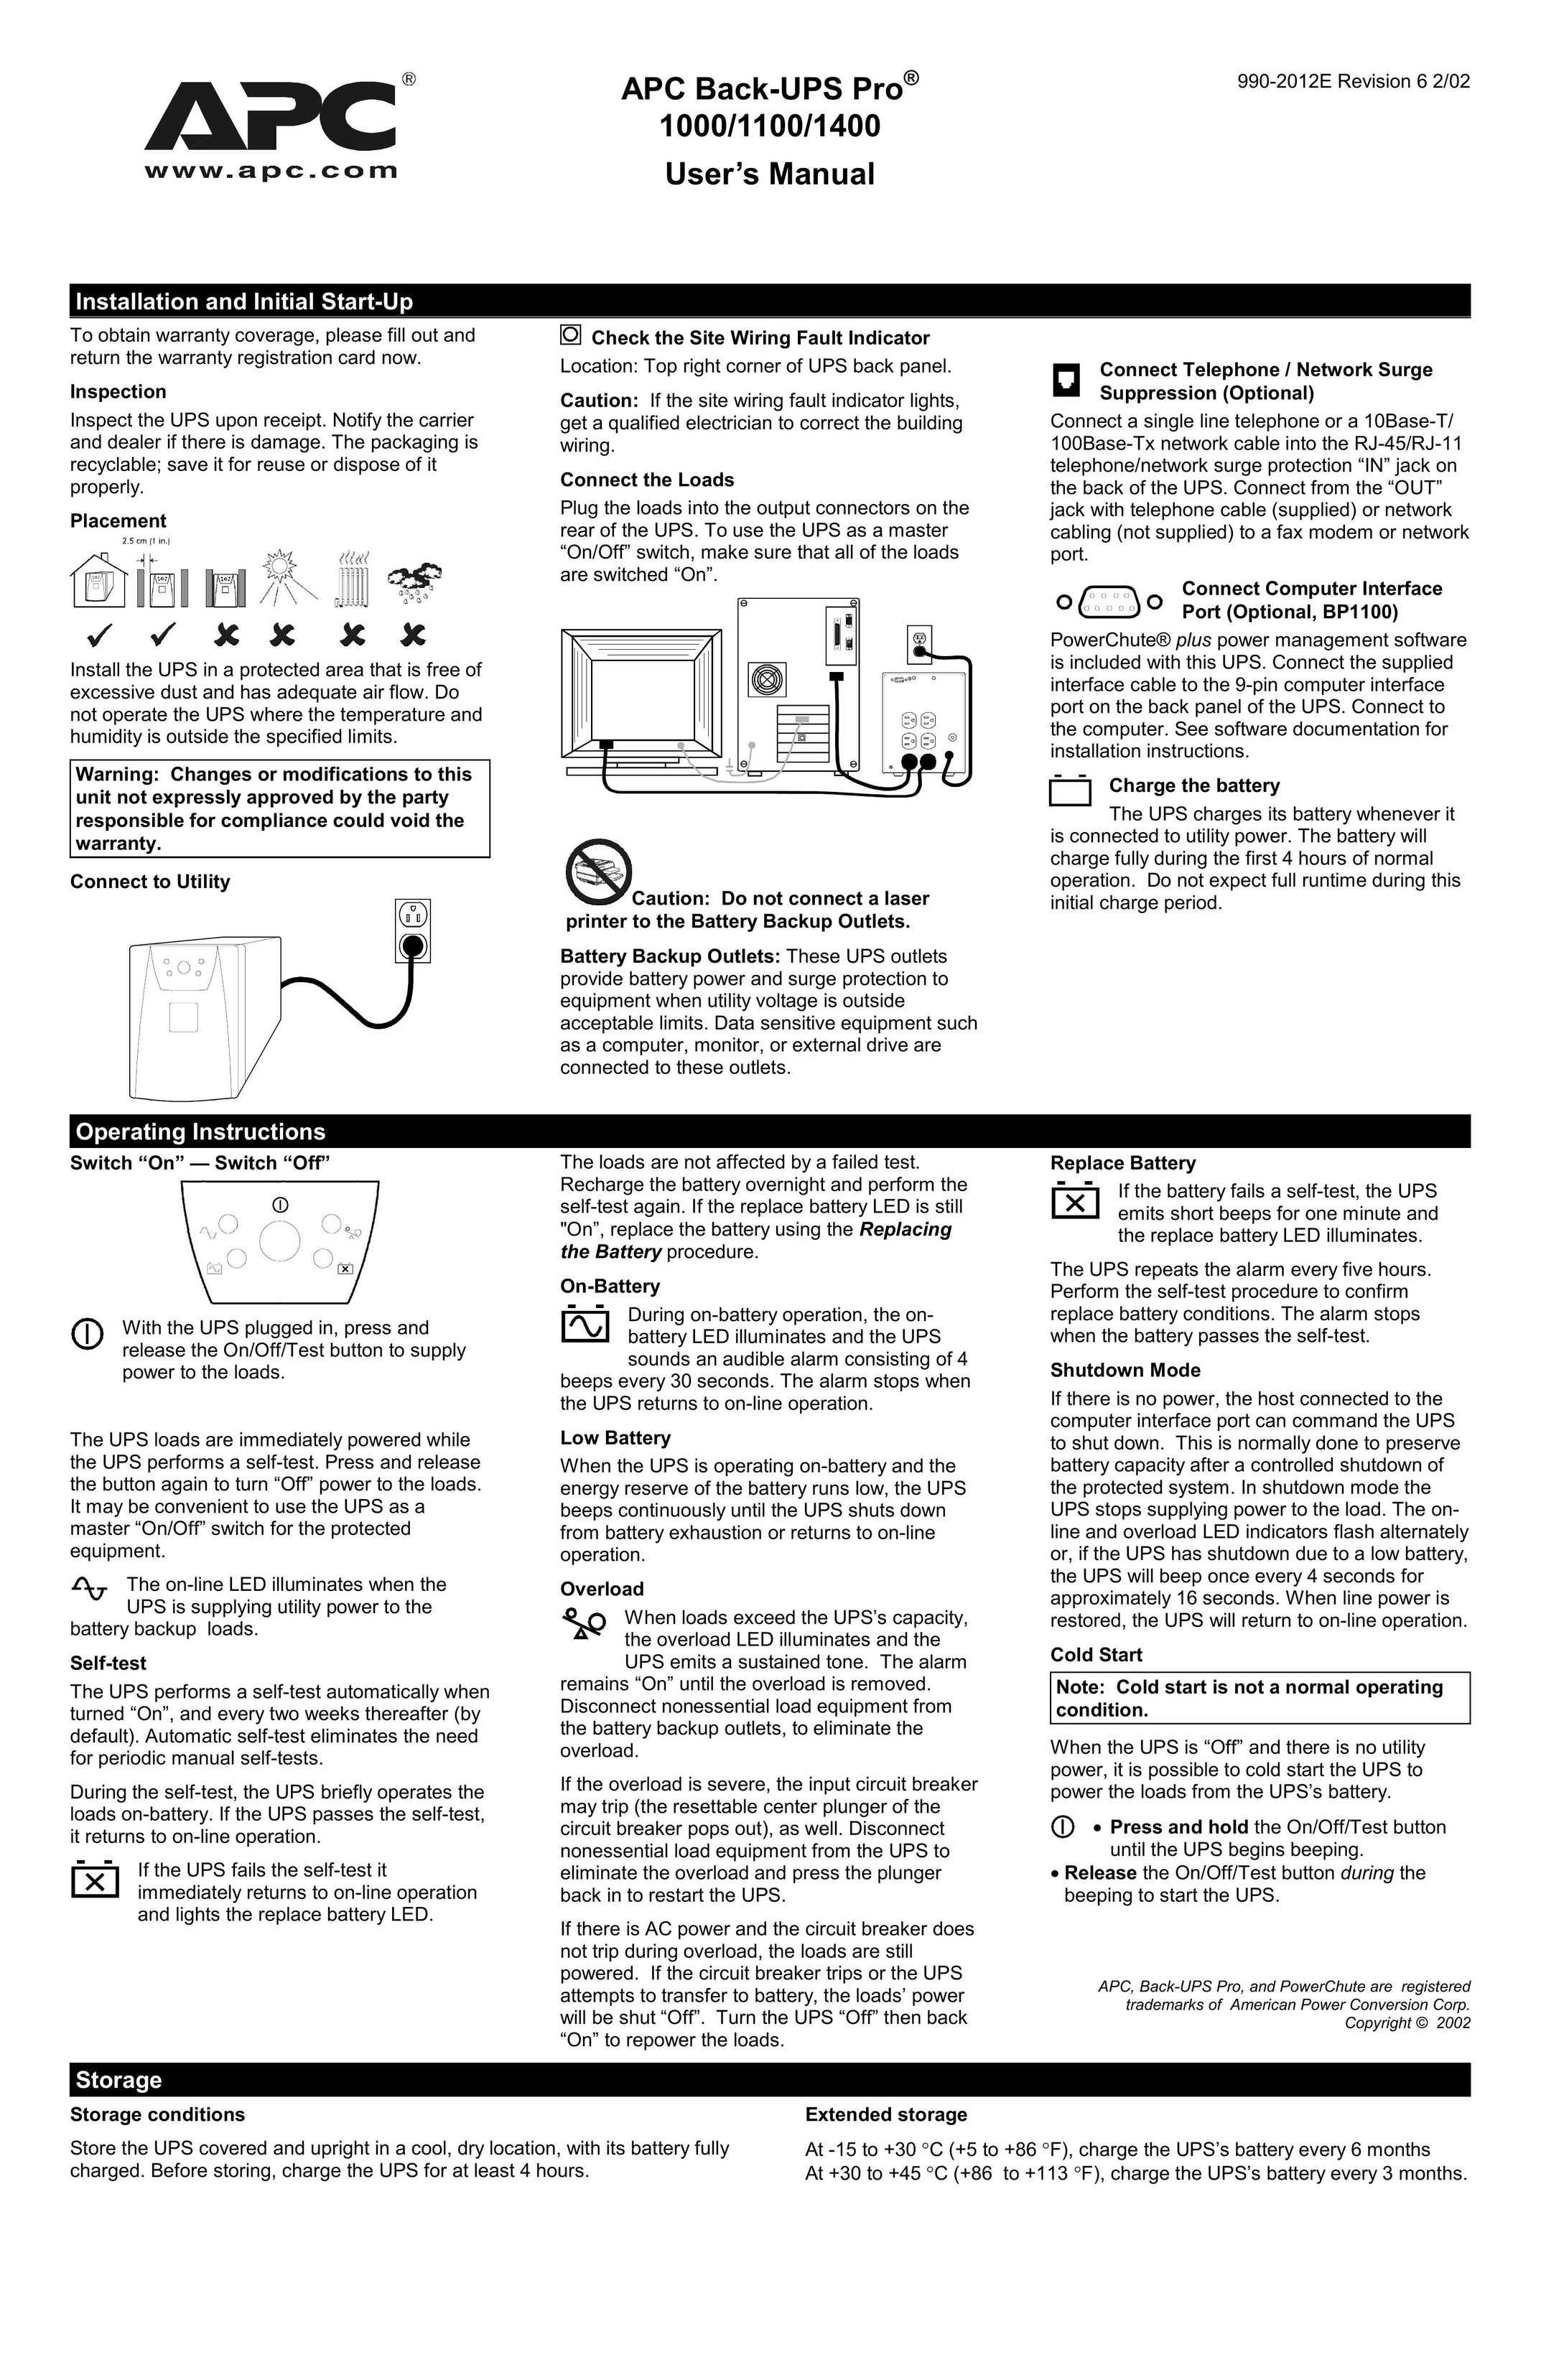 American Power Conversion 1000, 1100, 1400 Power Supply User Manual